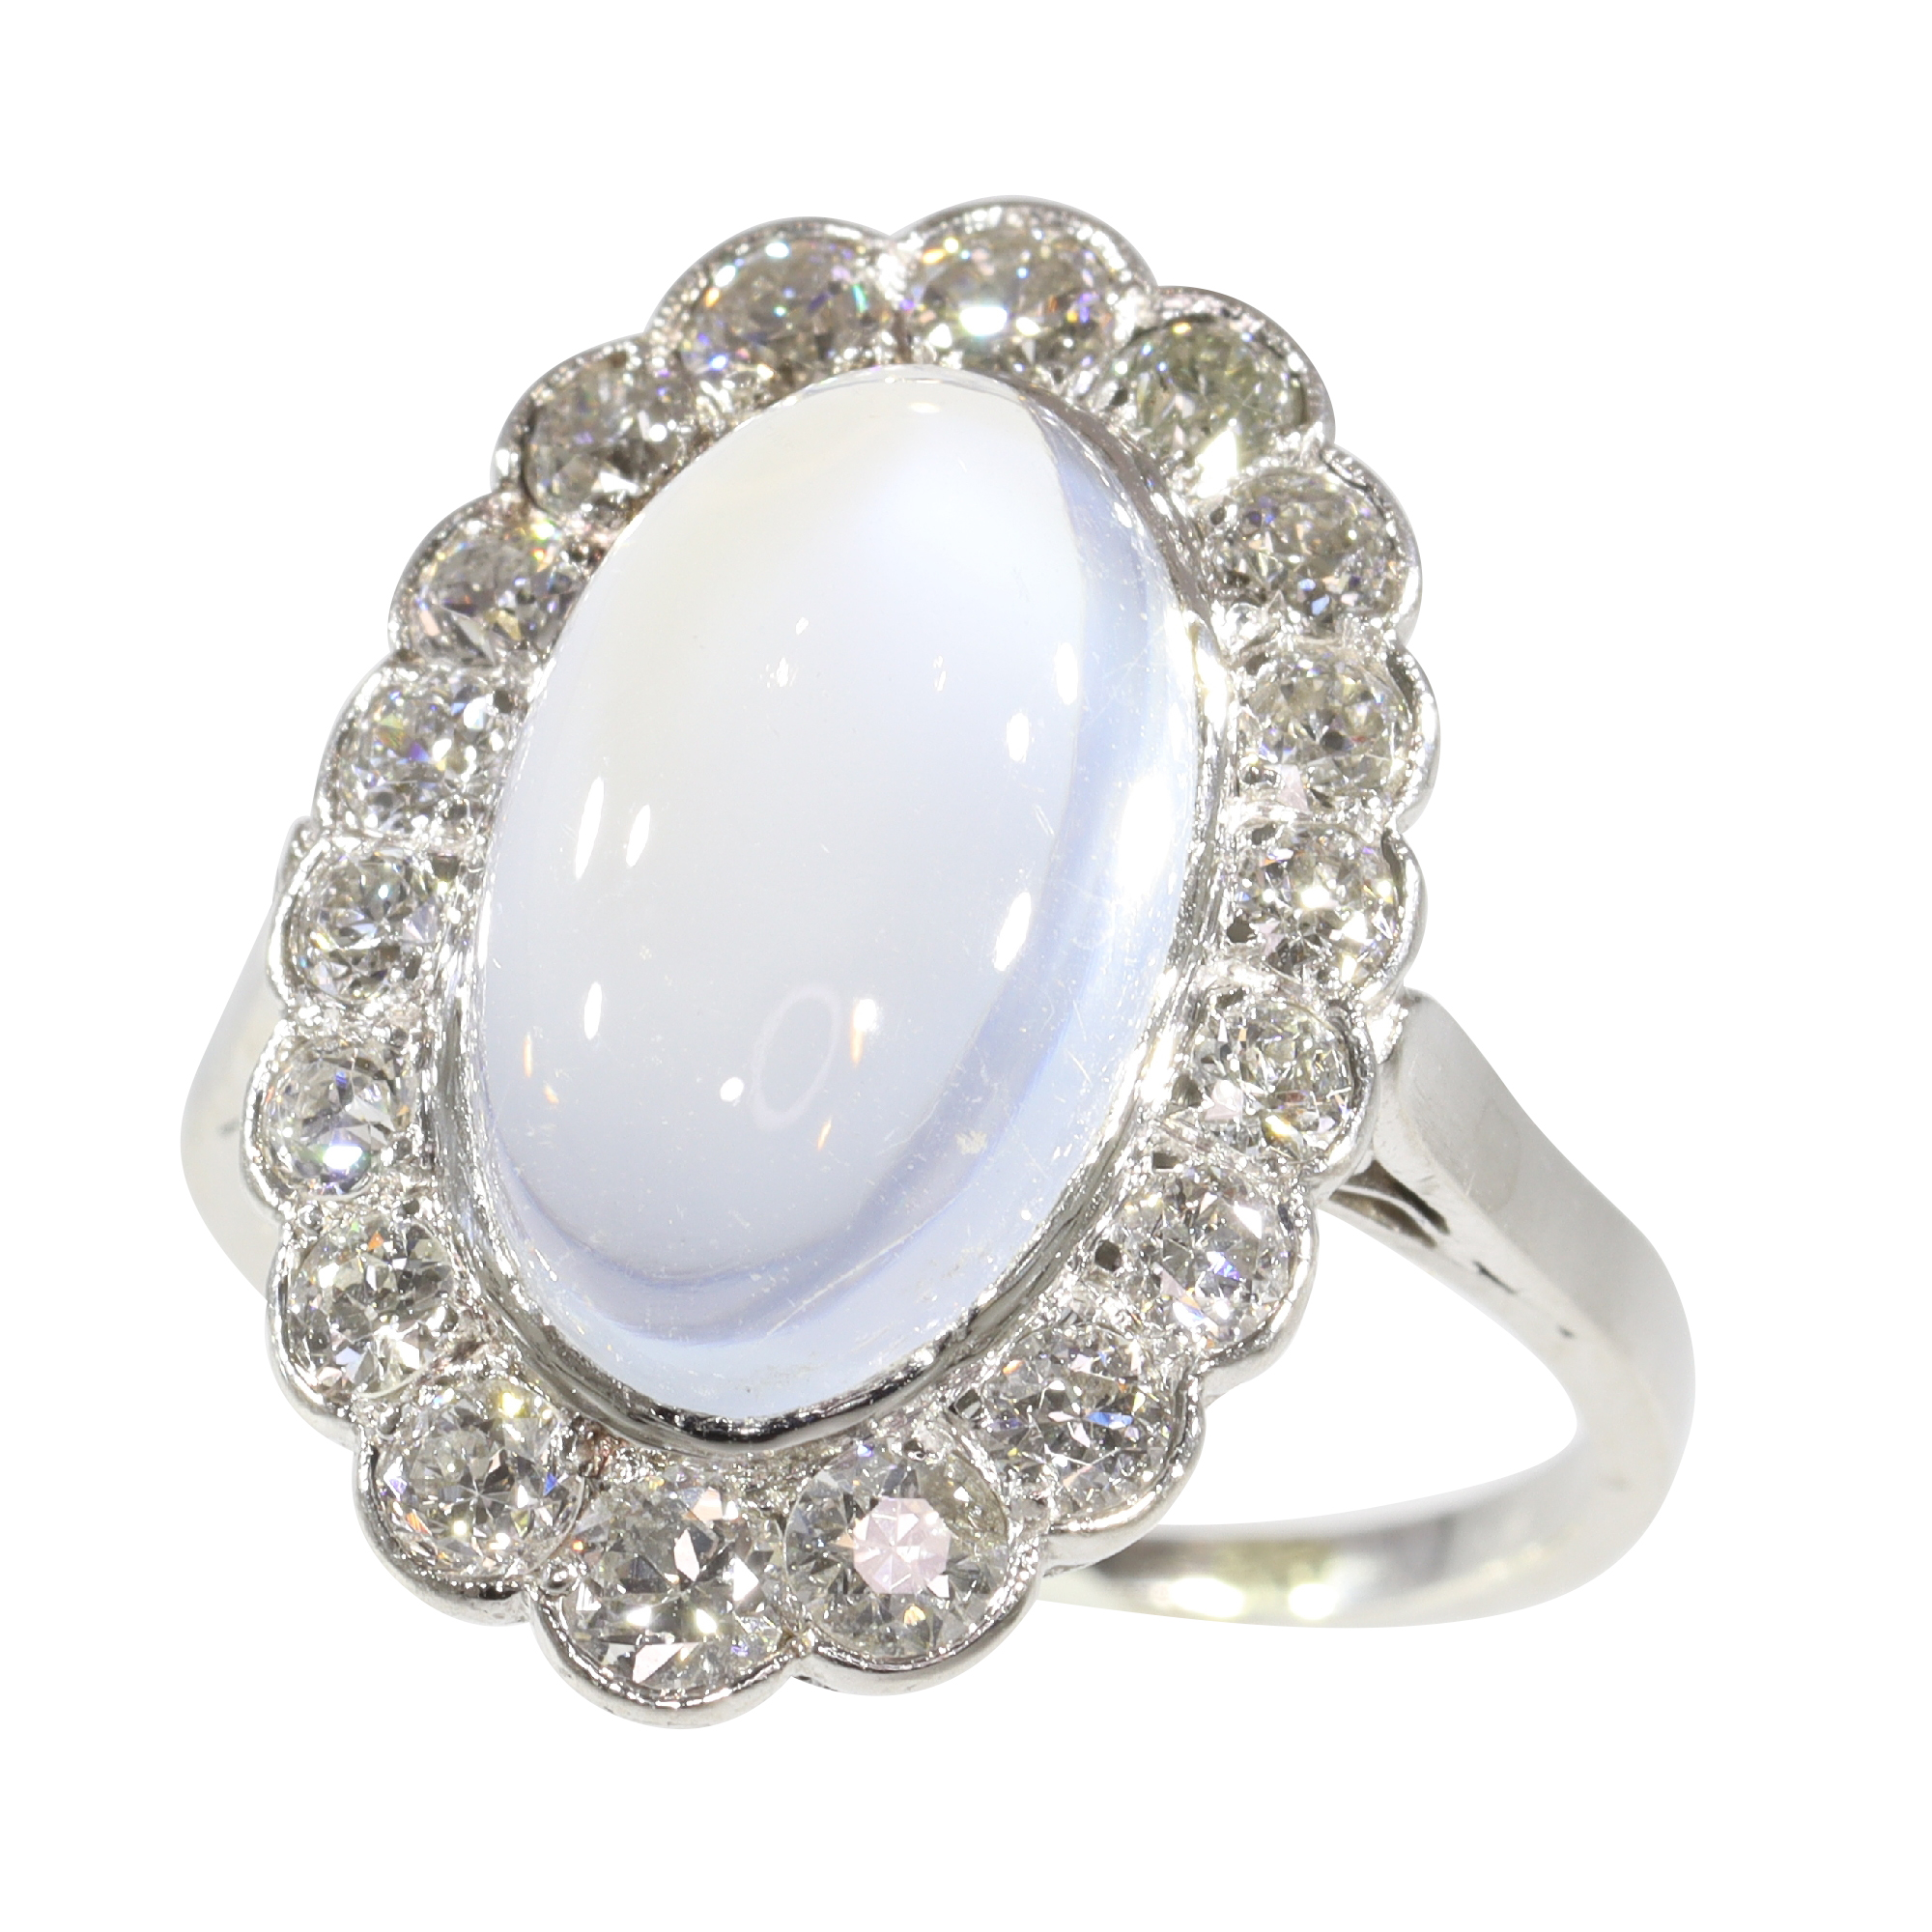 Vintage Allure: The Enigmatic Beauty of a 1950s Moonstone Ring